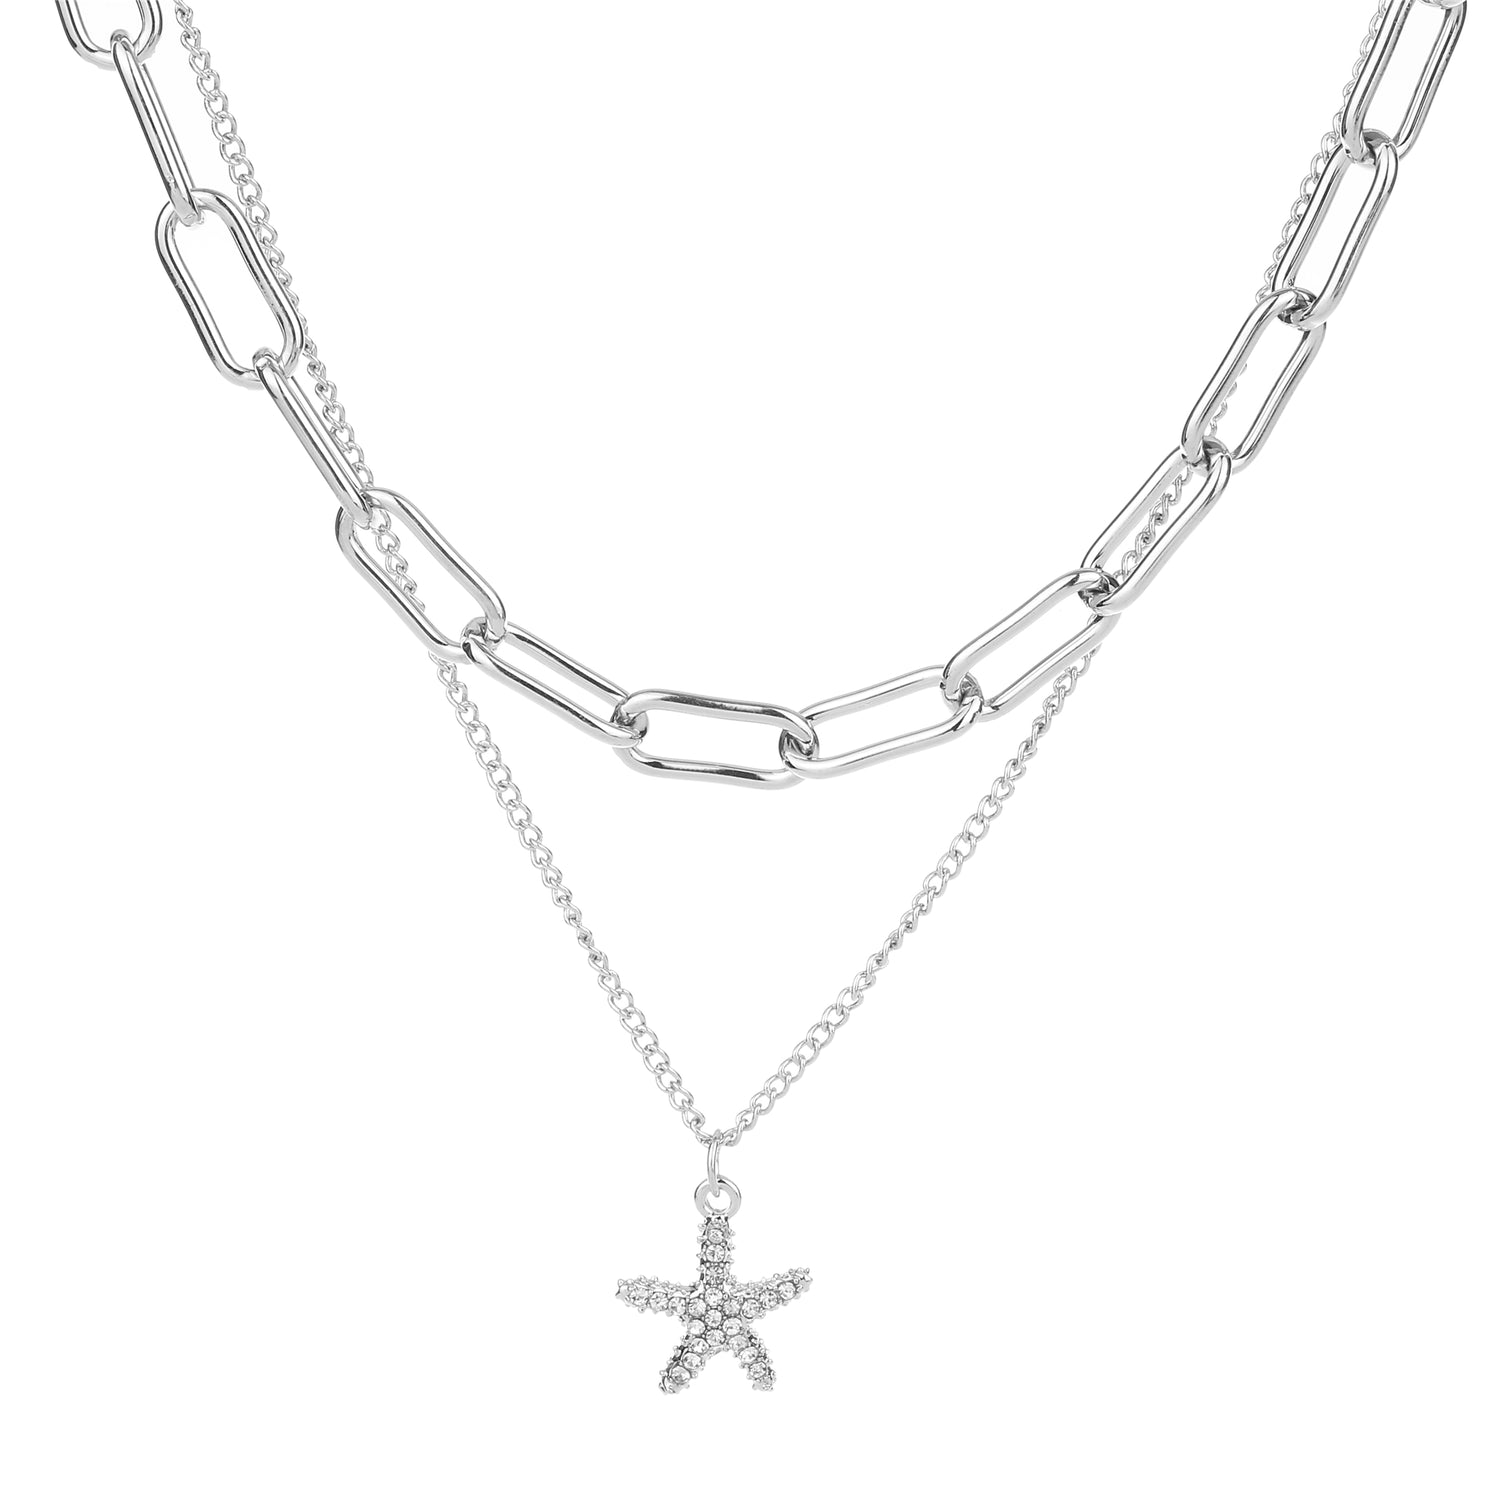 2 Row Starfish Necklace Silver